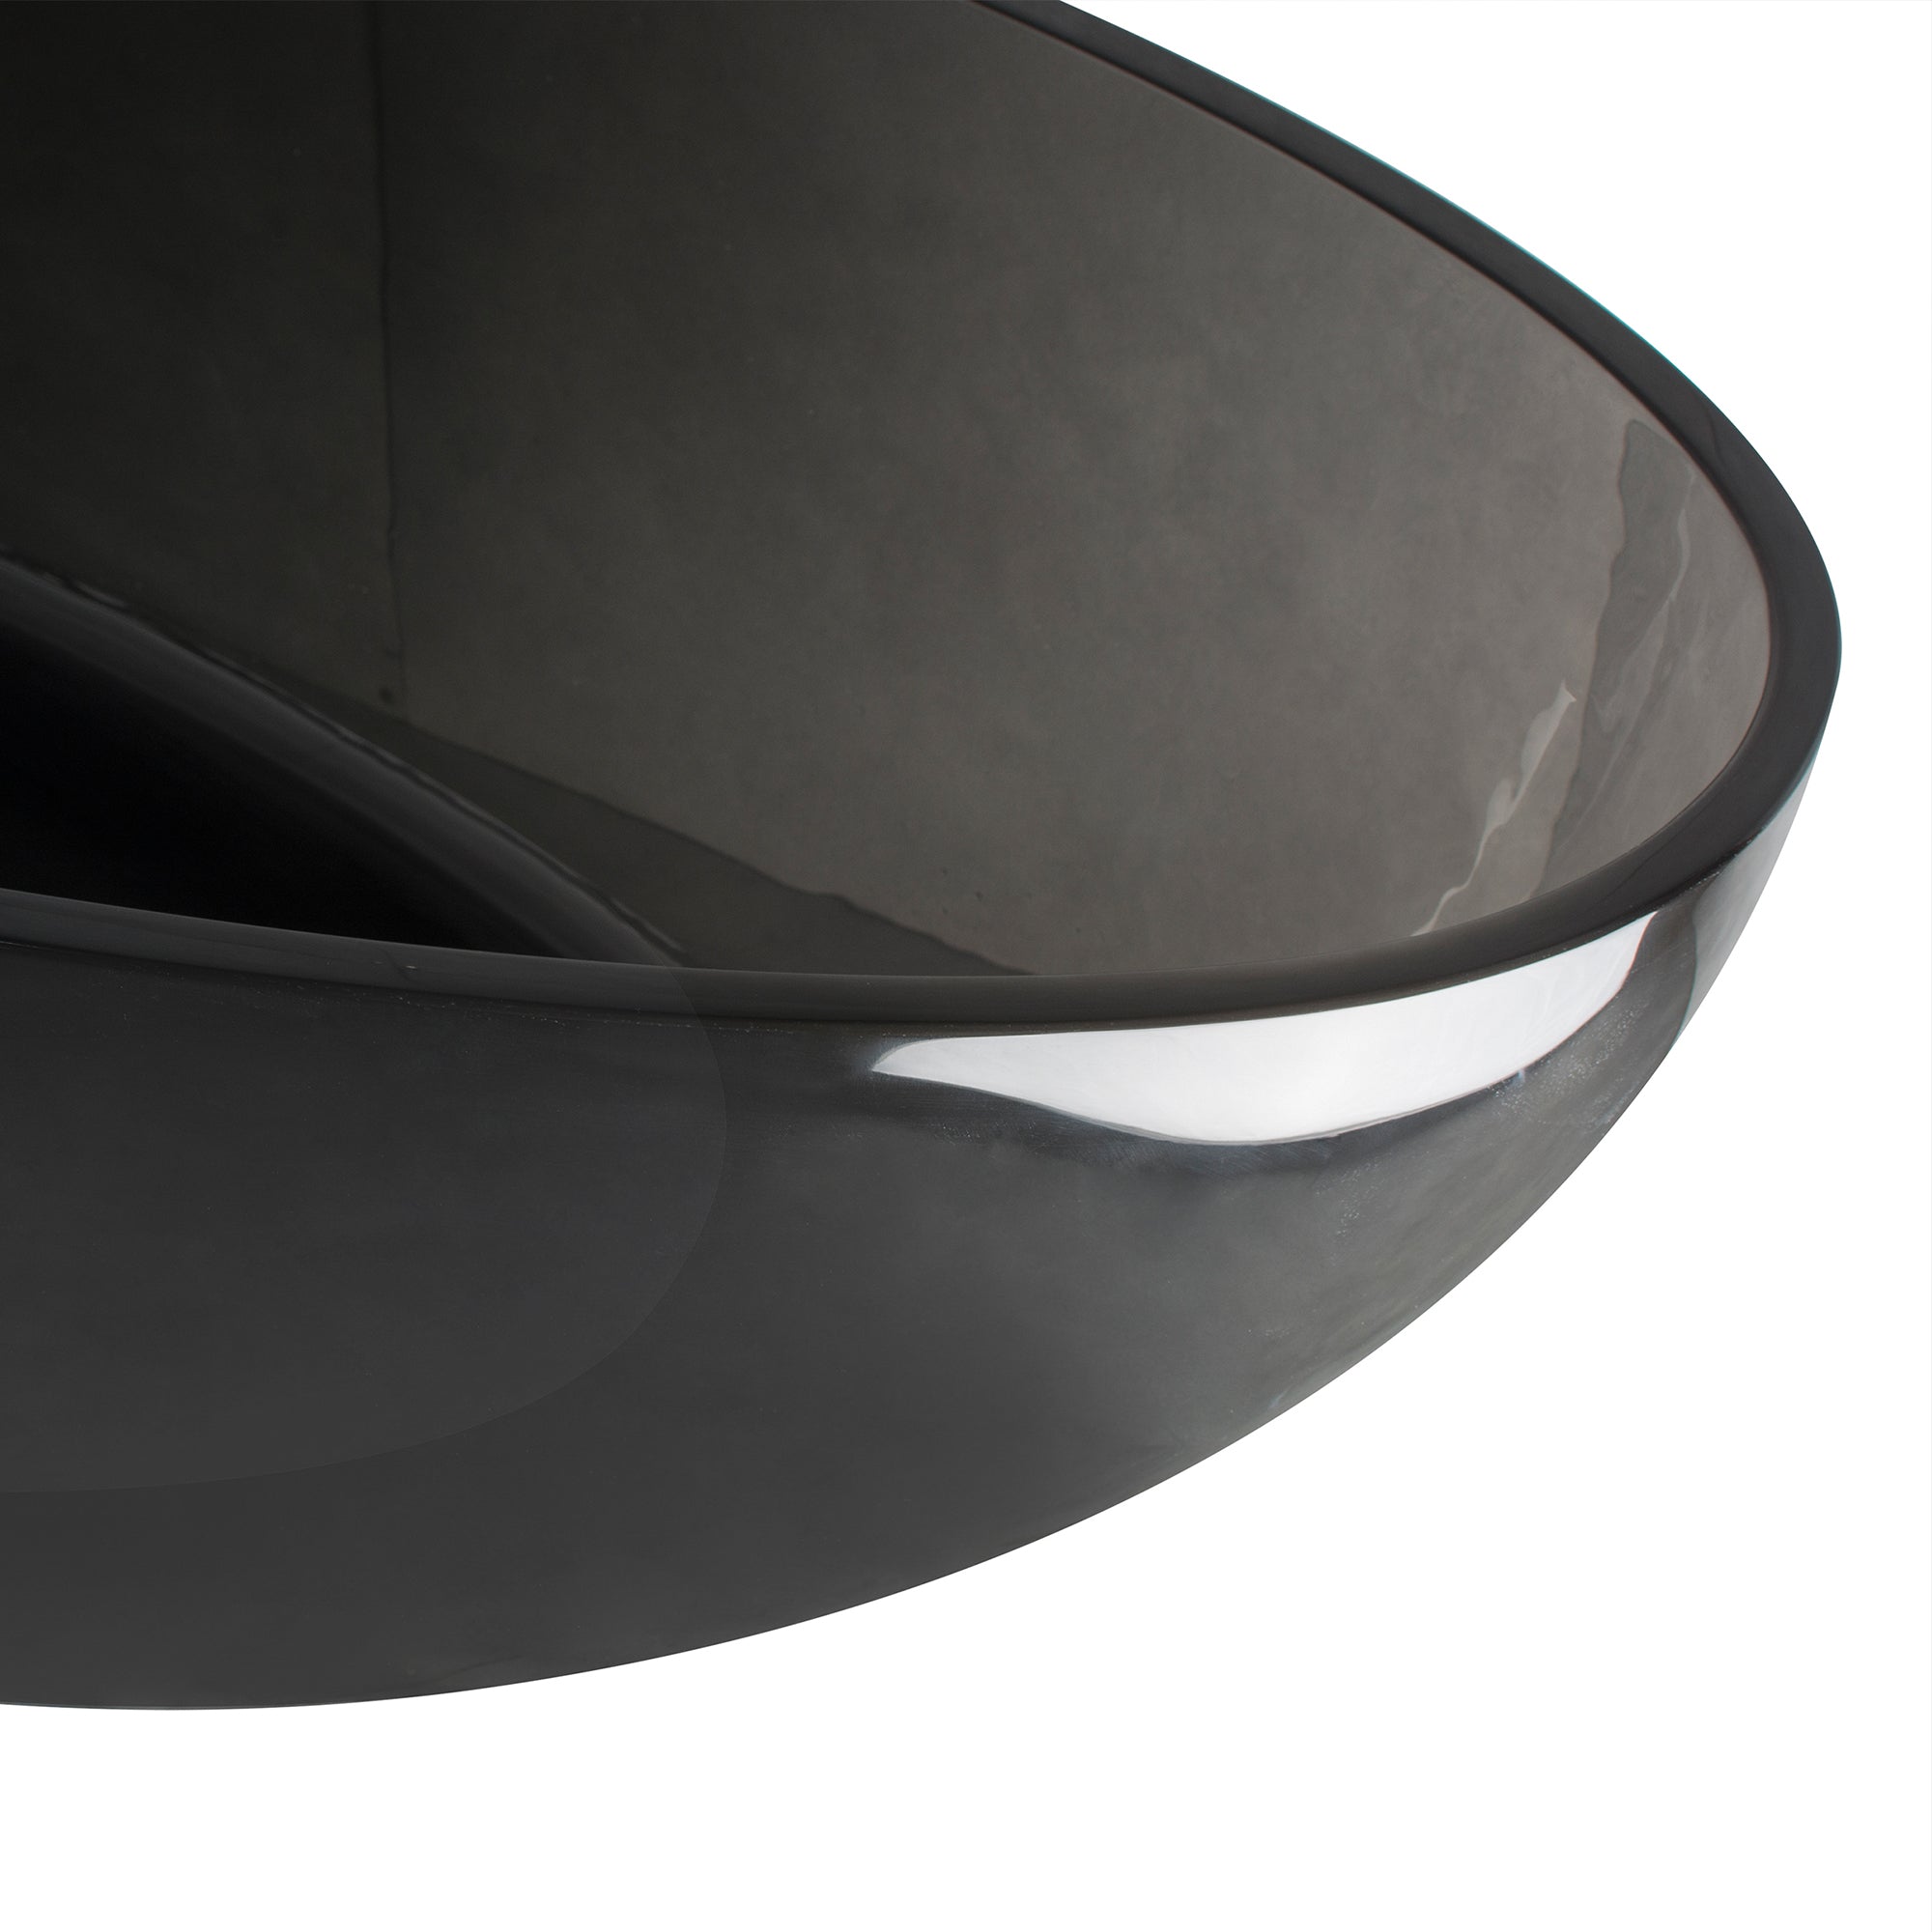 67" Egg Shaped Freestanding Solid Surface Soaking Bathtub in Translucent Black RX-S01-67TB